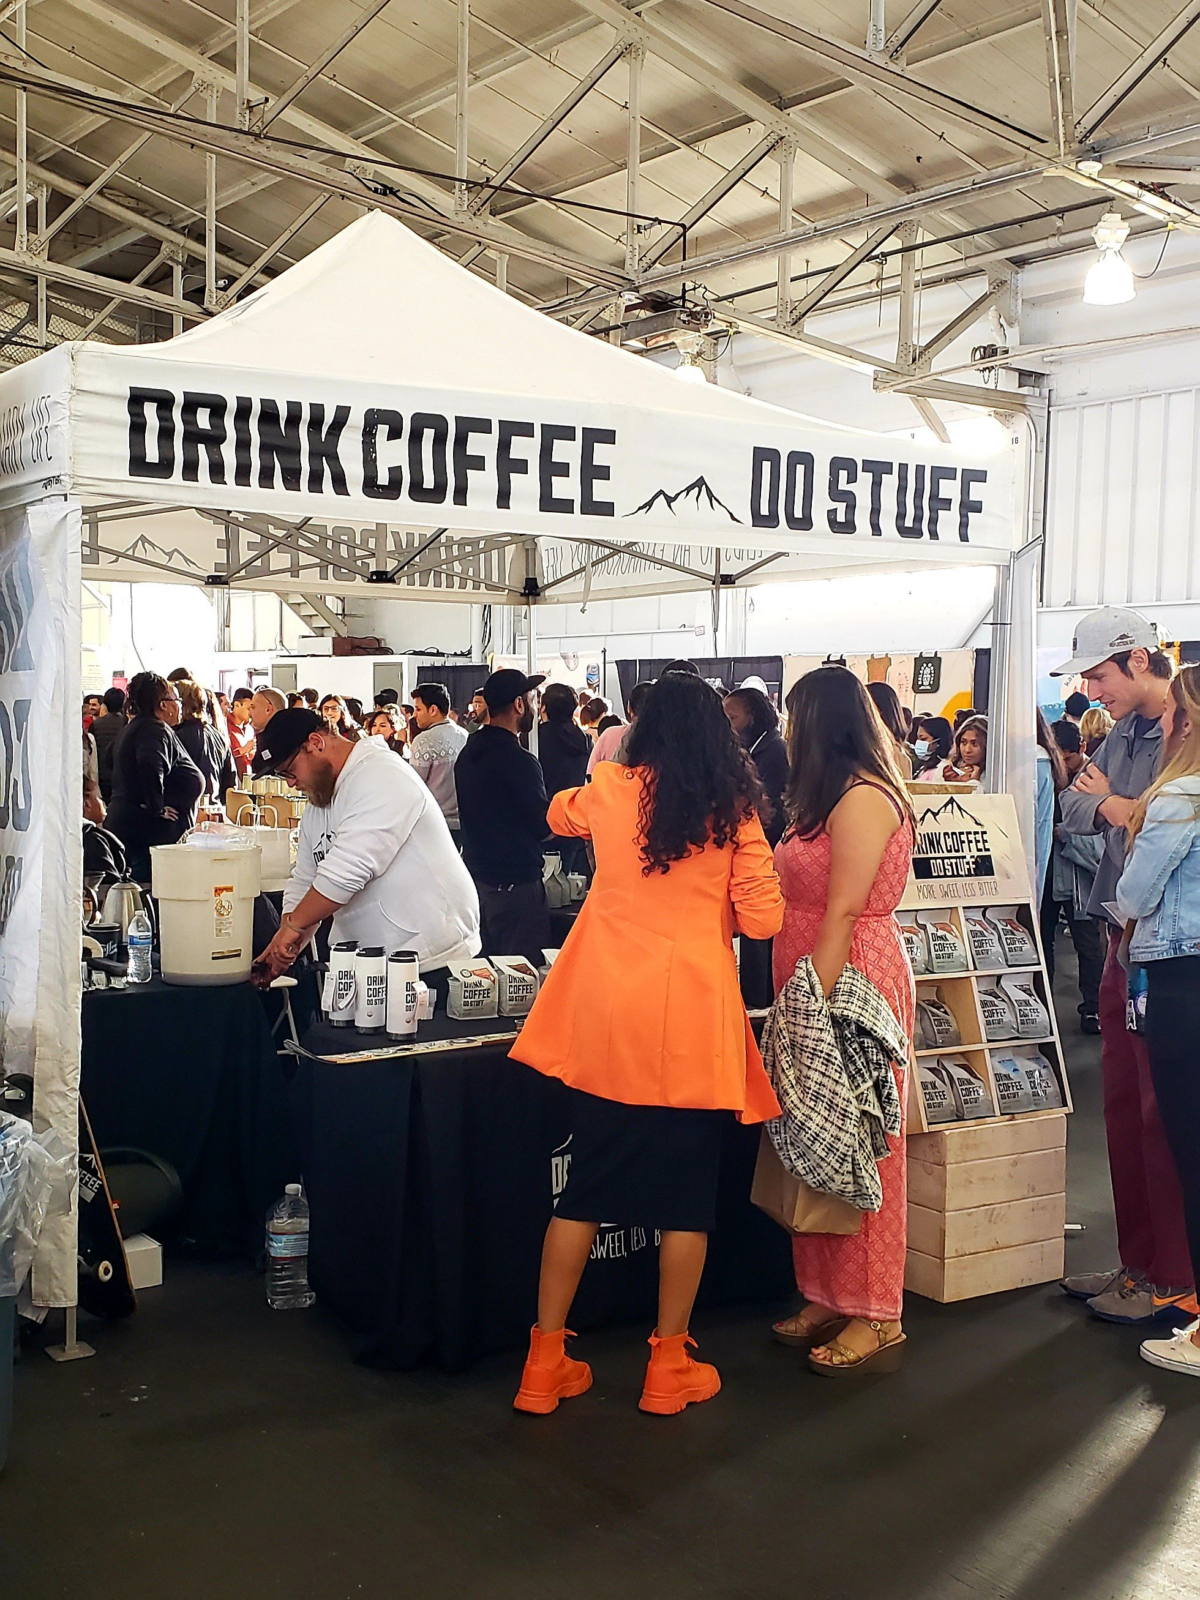 Festival goers surround a shite tent in the pavilion for the company Drink Coffee Do Stuff. They have merch like coffee bags and portable mugs on display. A bearded barista in a black hat pours cold brew for a guest from a Toddy bucket.